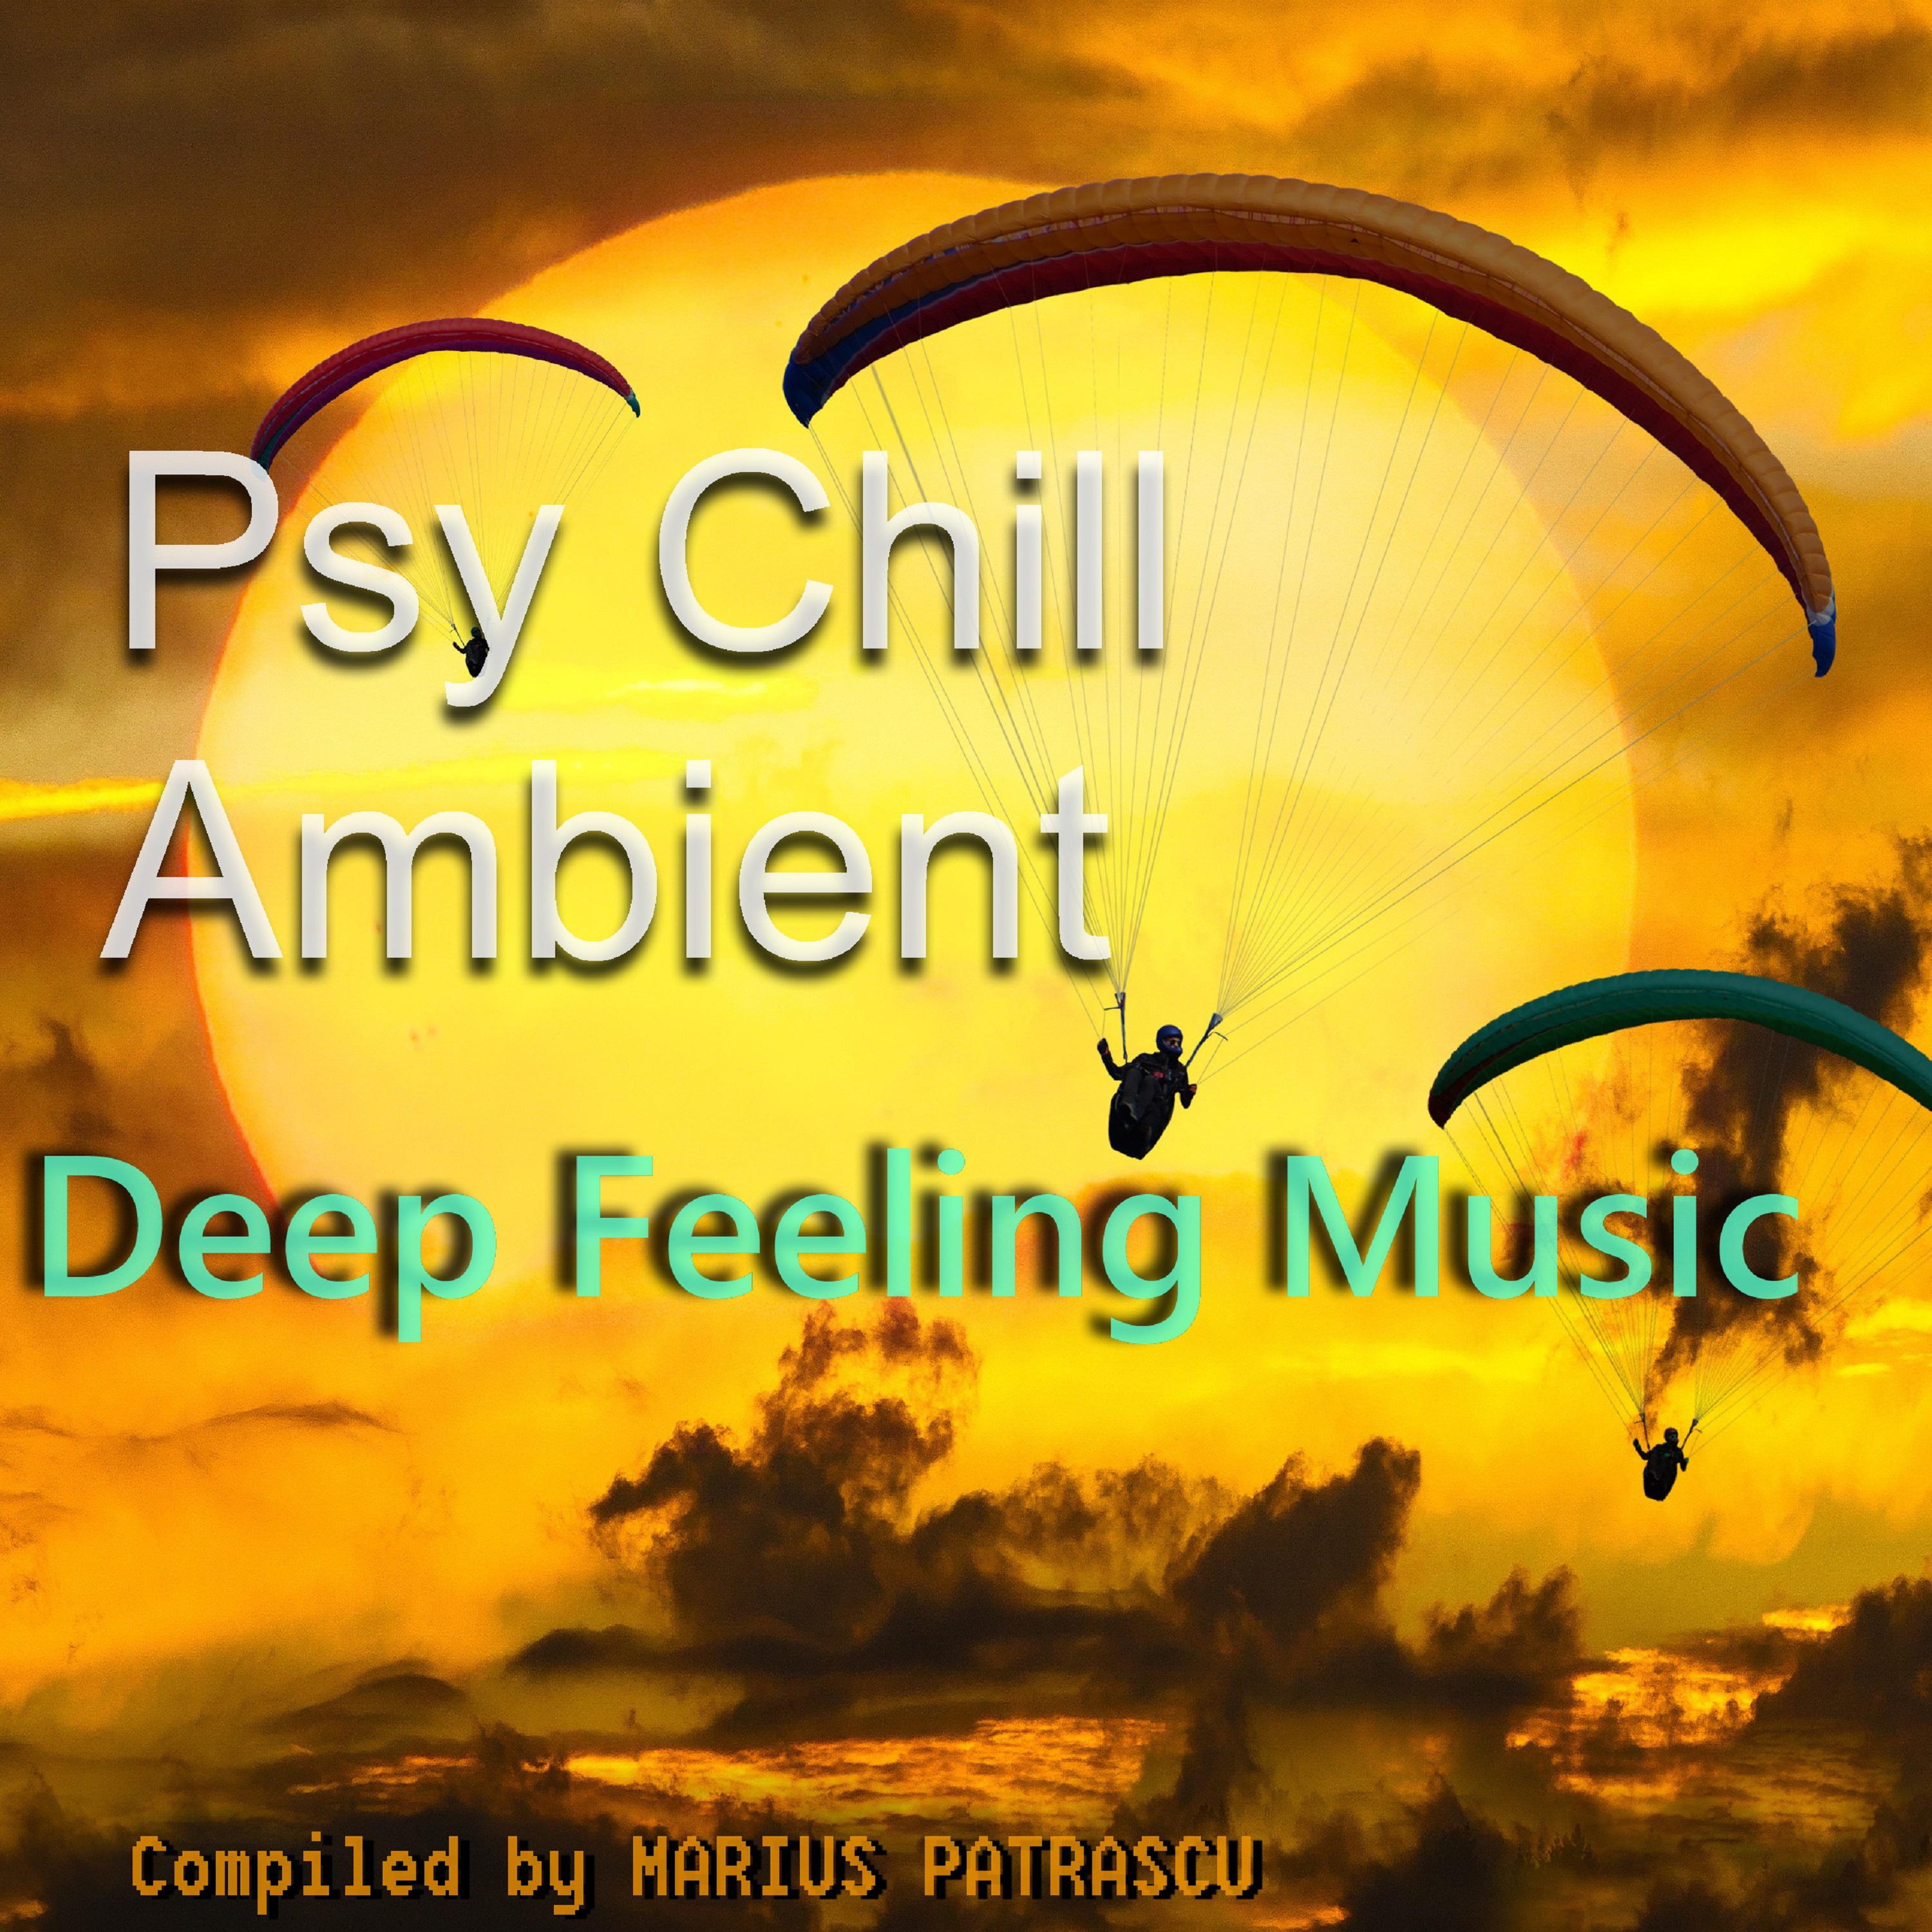 Psy Chill Ambient Deep Feeling Music (Compiled and Mixed by Marius Patrascu)